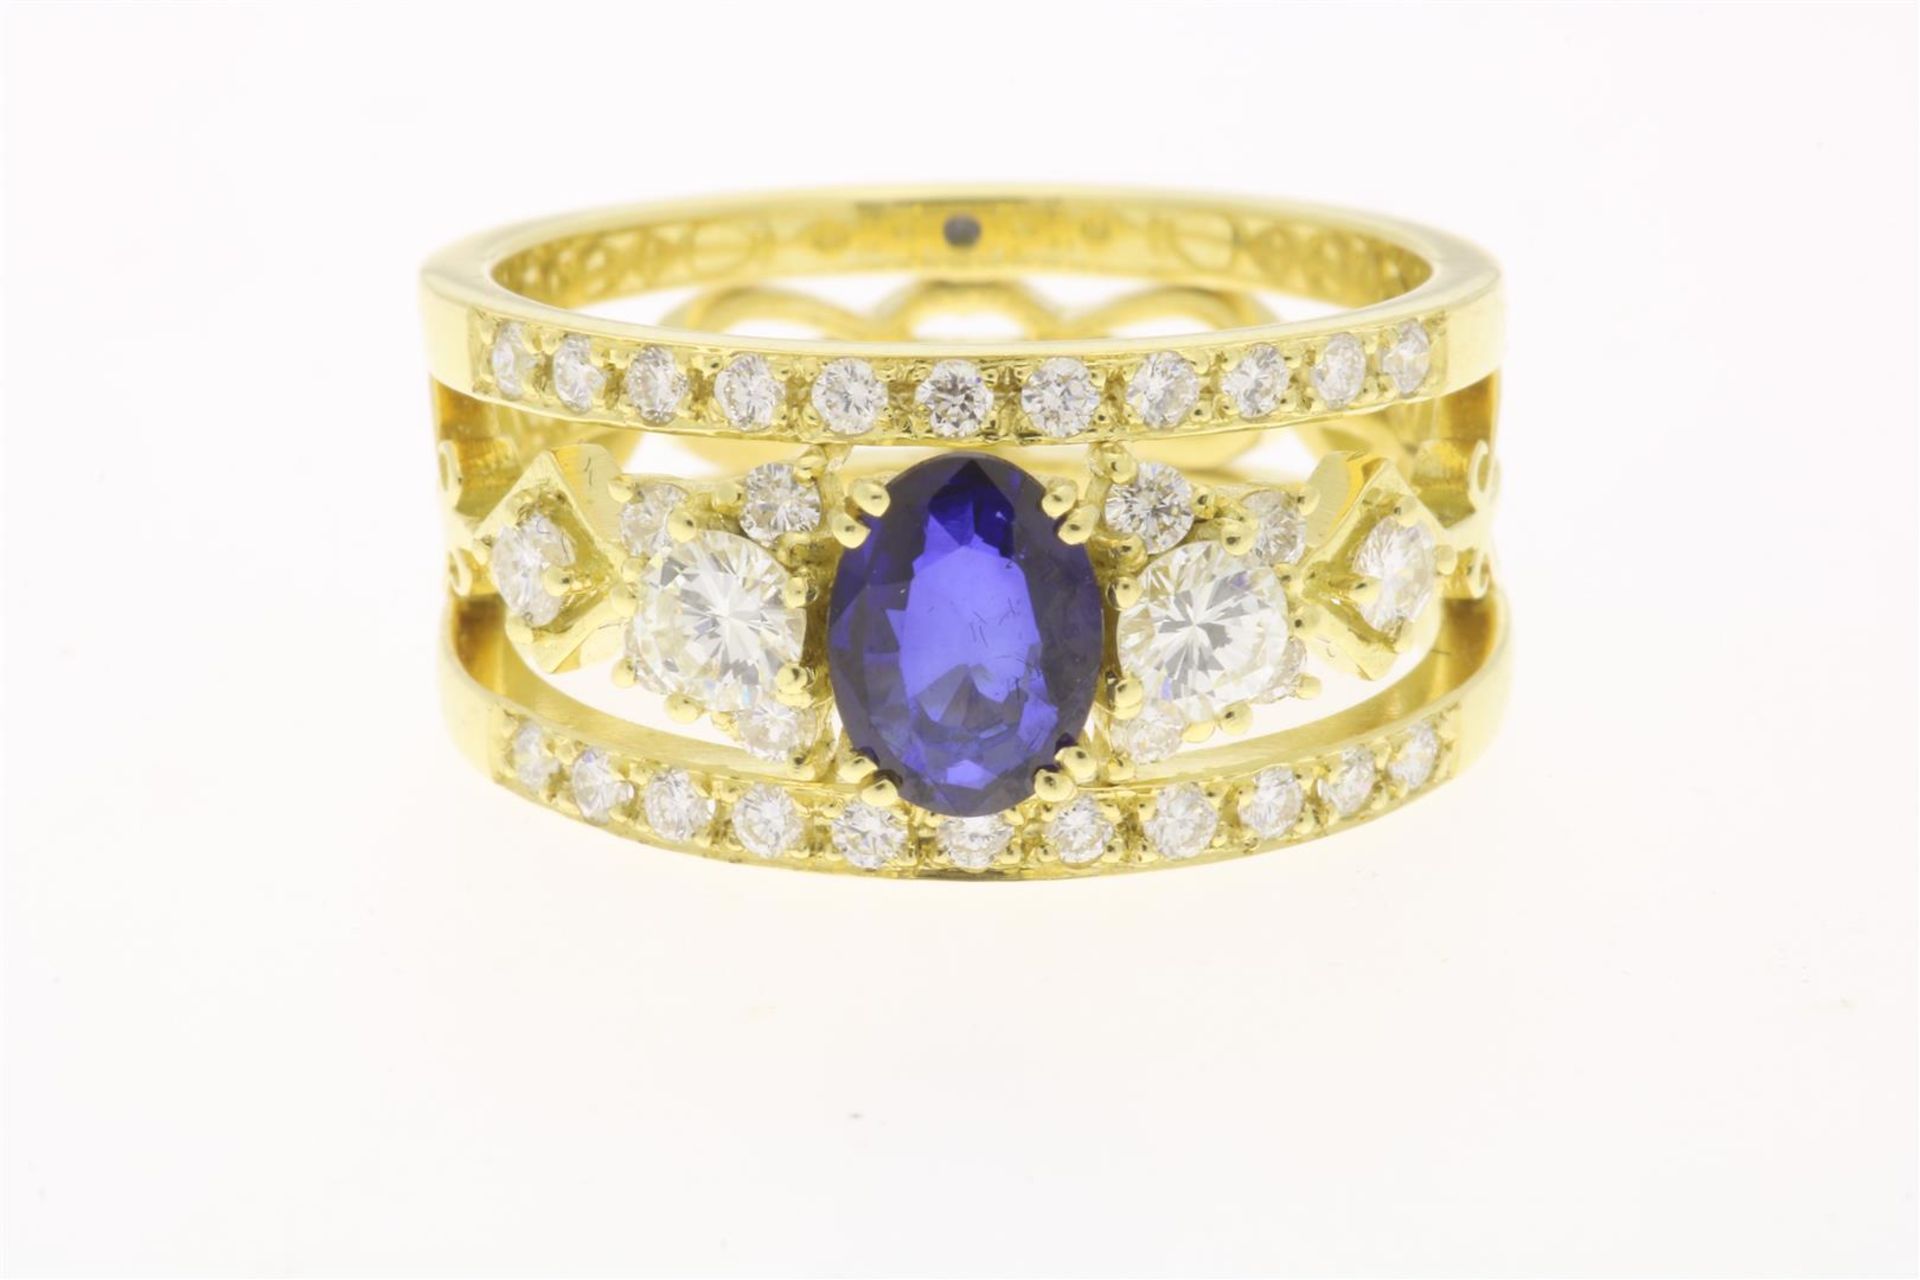 Yellow gold band ring with sapphire and diamond